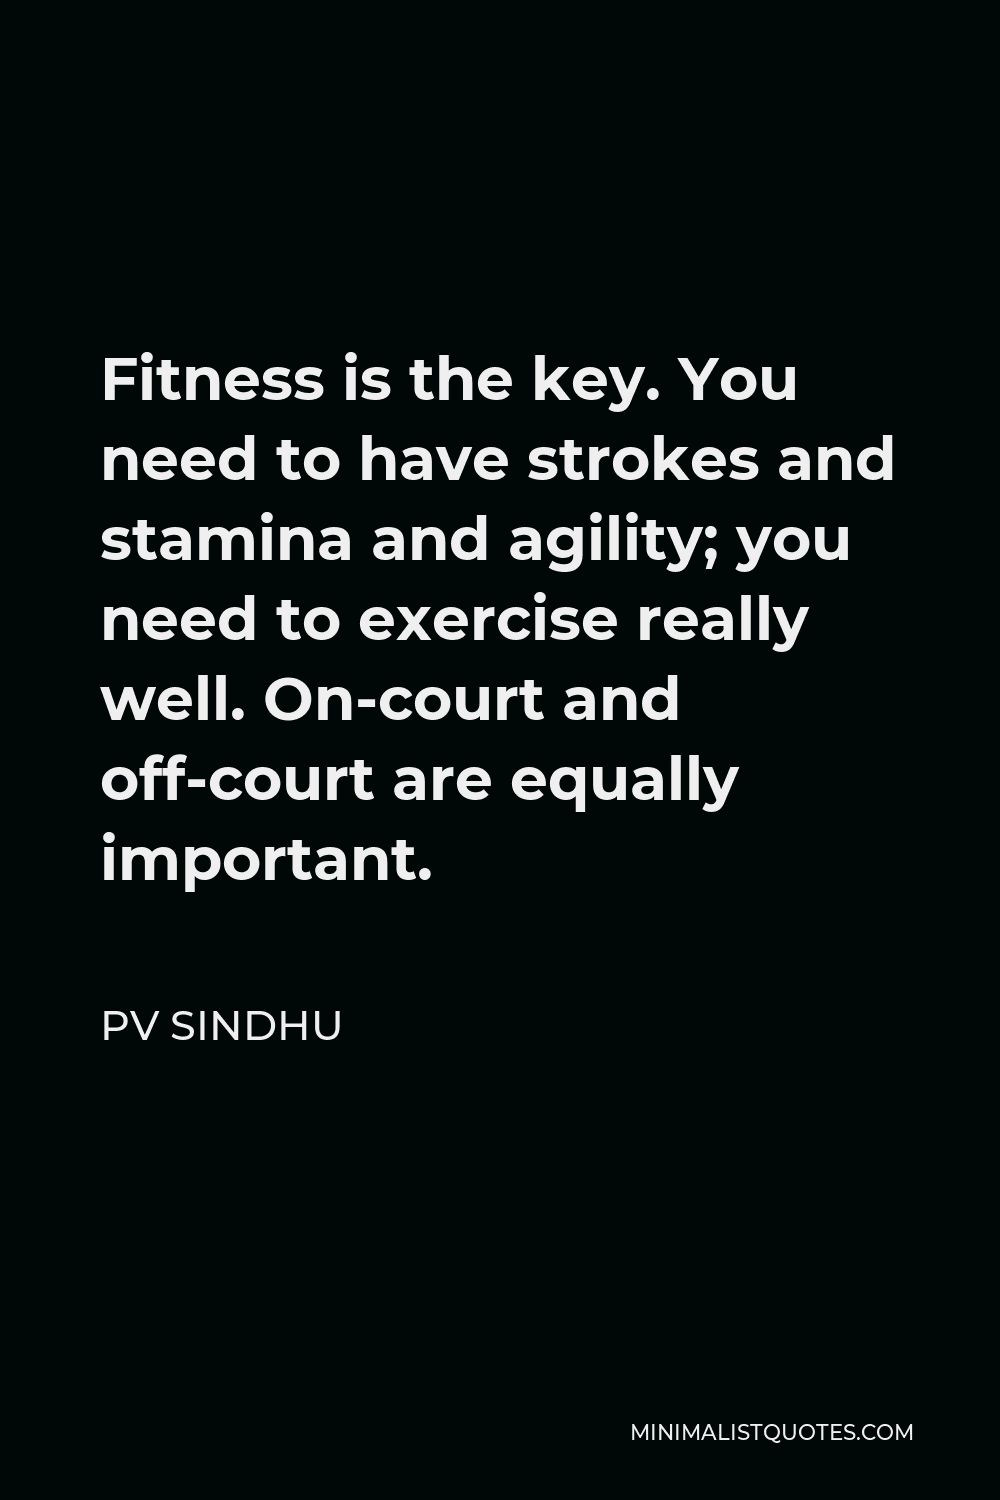 PV Sindhu Quote: You win some and lose some. Its all part 